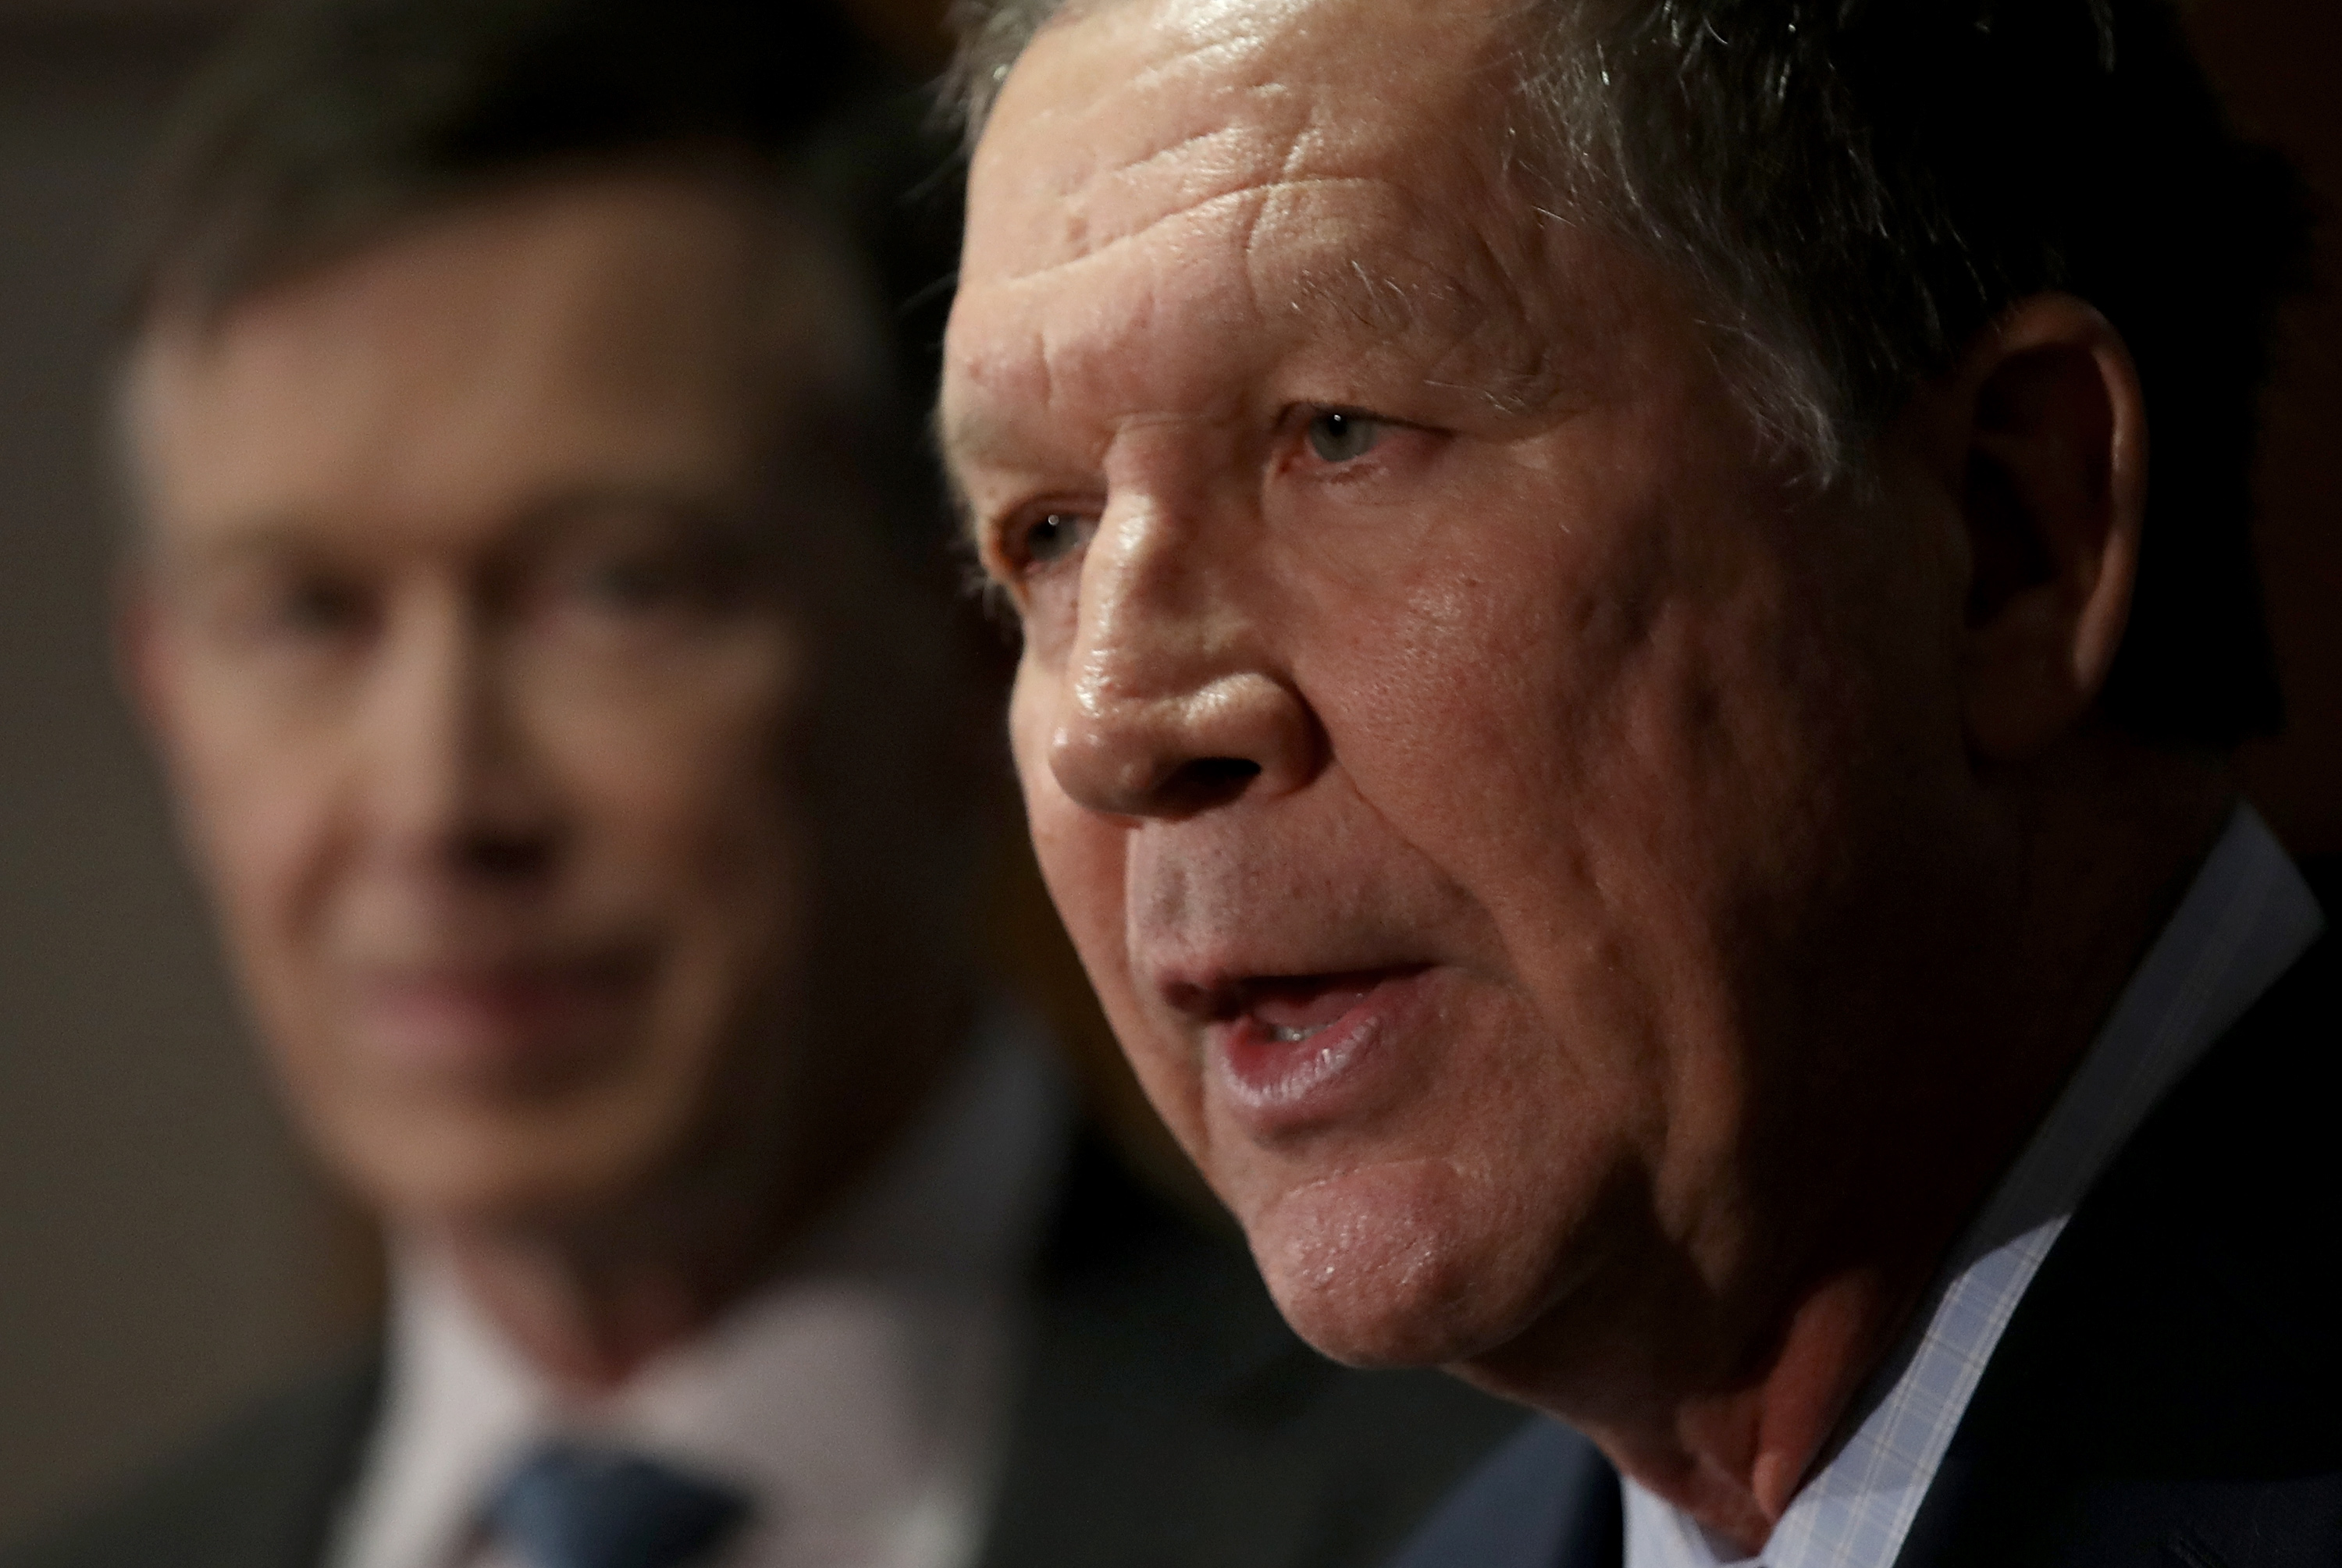 WASHINGTON, DC - FEBRUARY 23: Gov. John Kasich (R) (R-OH) speaks as Gov. John Hickenlooper (L) (D-CO) listens during a press conference February 23, 2018 in Washington, DC. The three governors unveiled a blueprint for improved health care in the U.S. during the press conference. (Photo by Win McNamee/Getty Images)